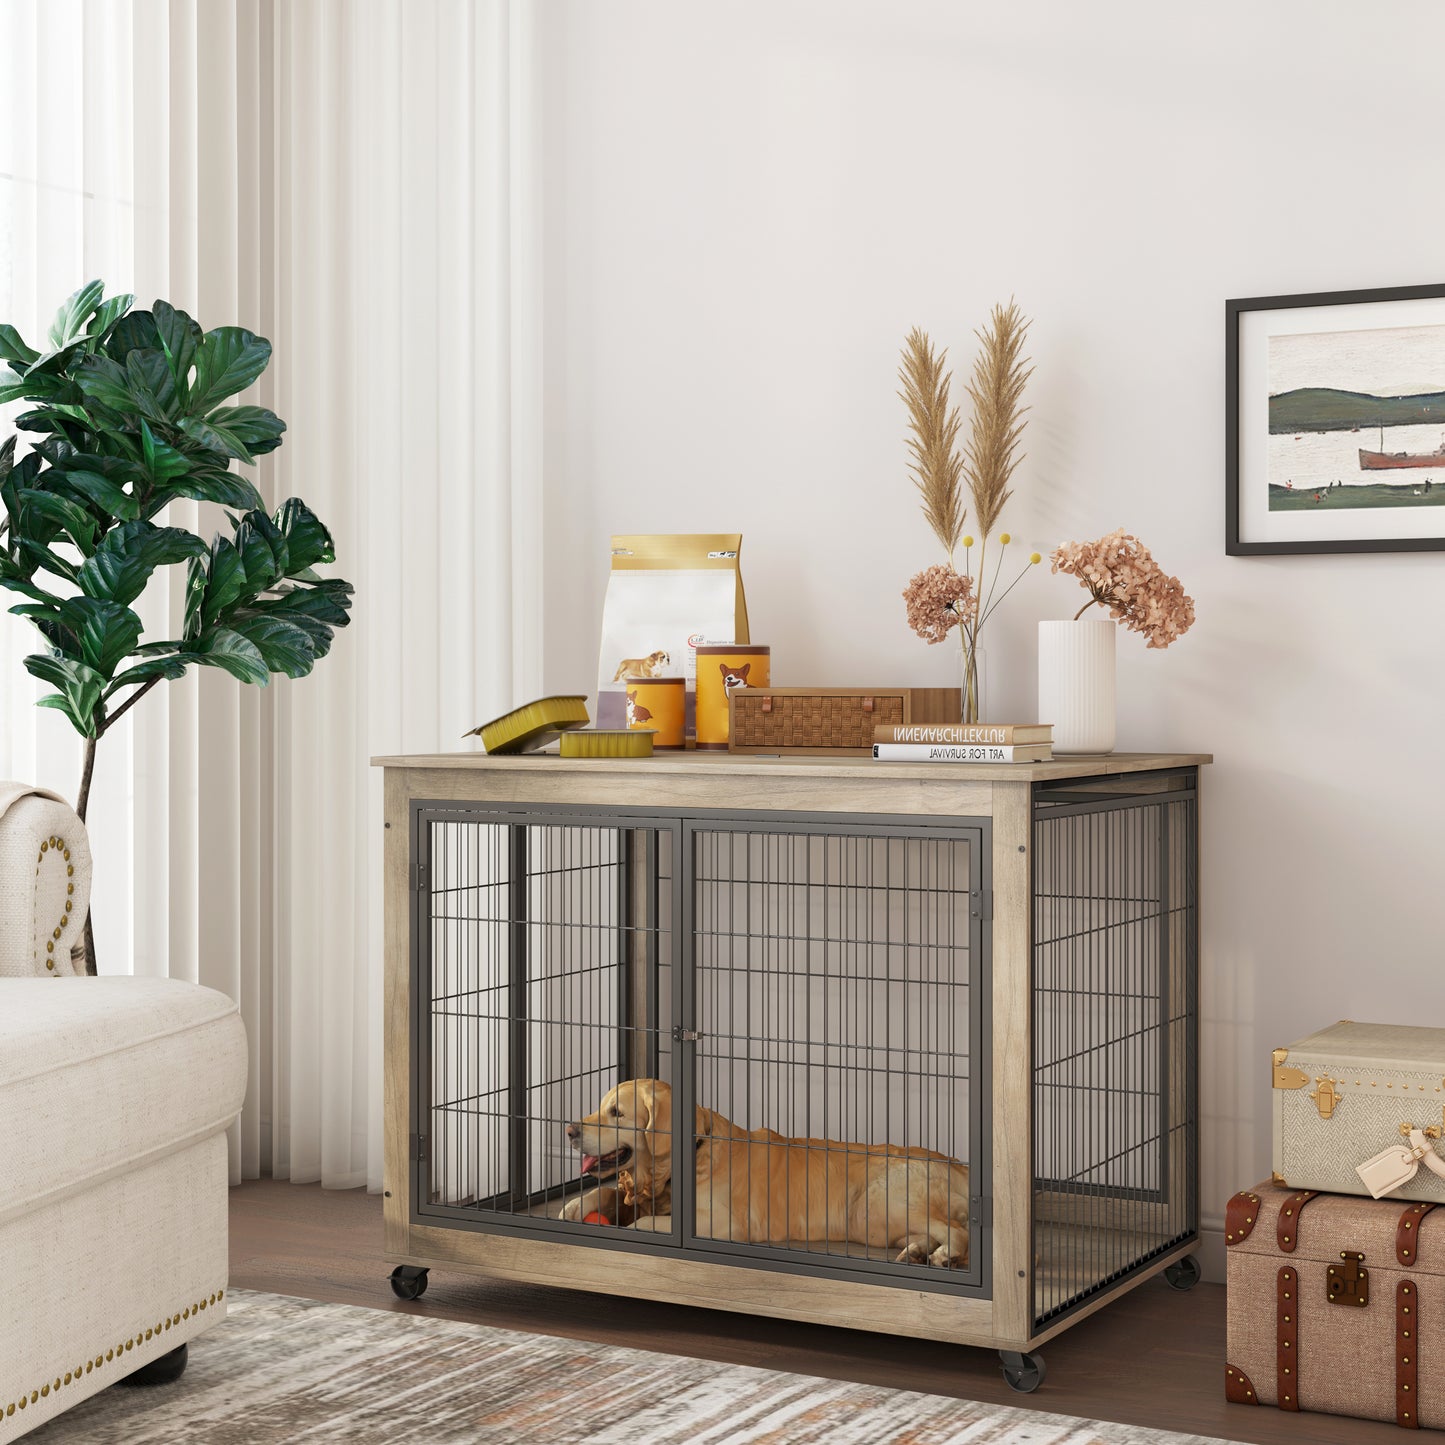 Furniture Style Dog Crate Side Table on Wheels